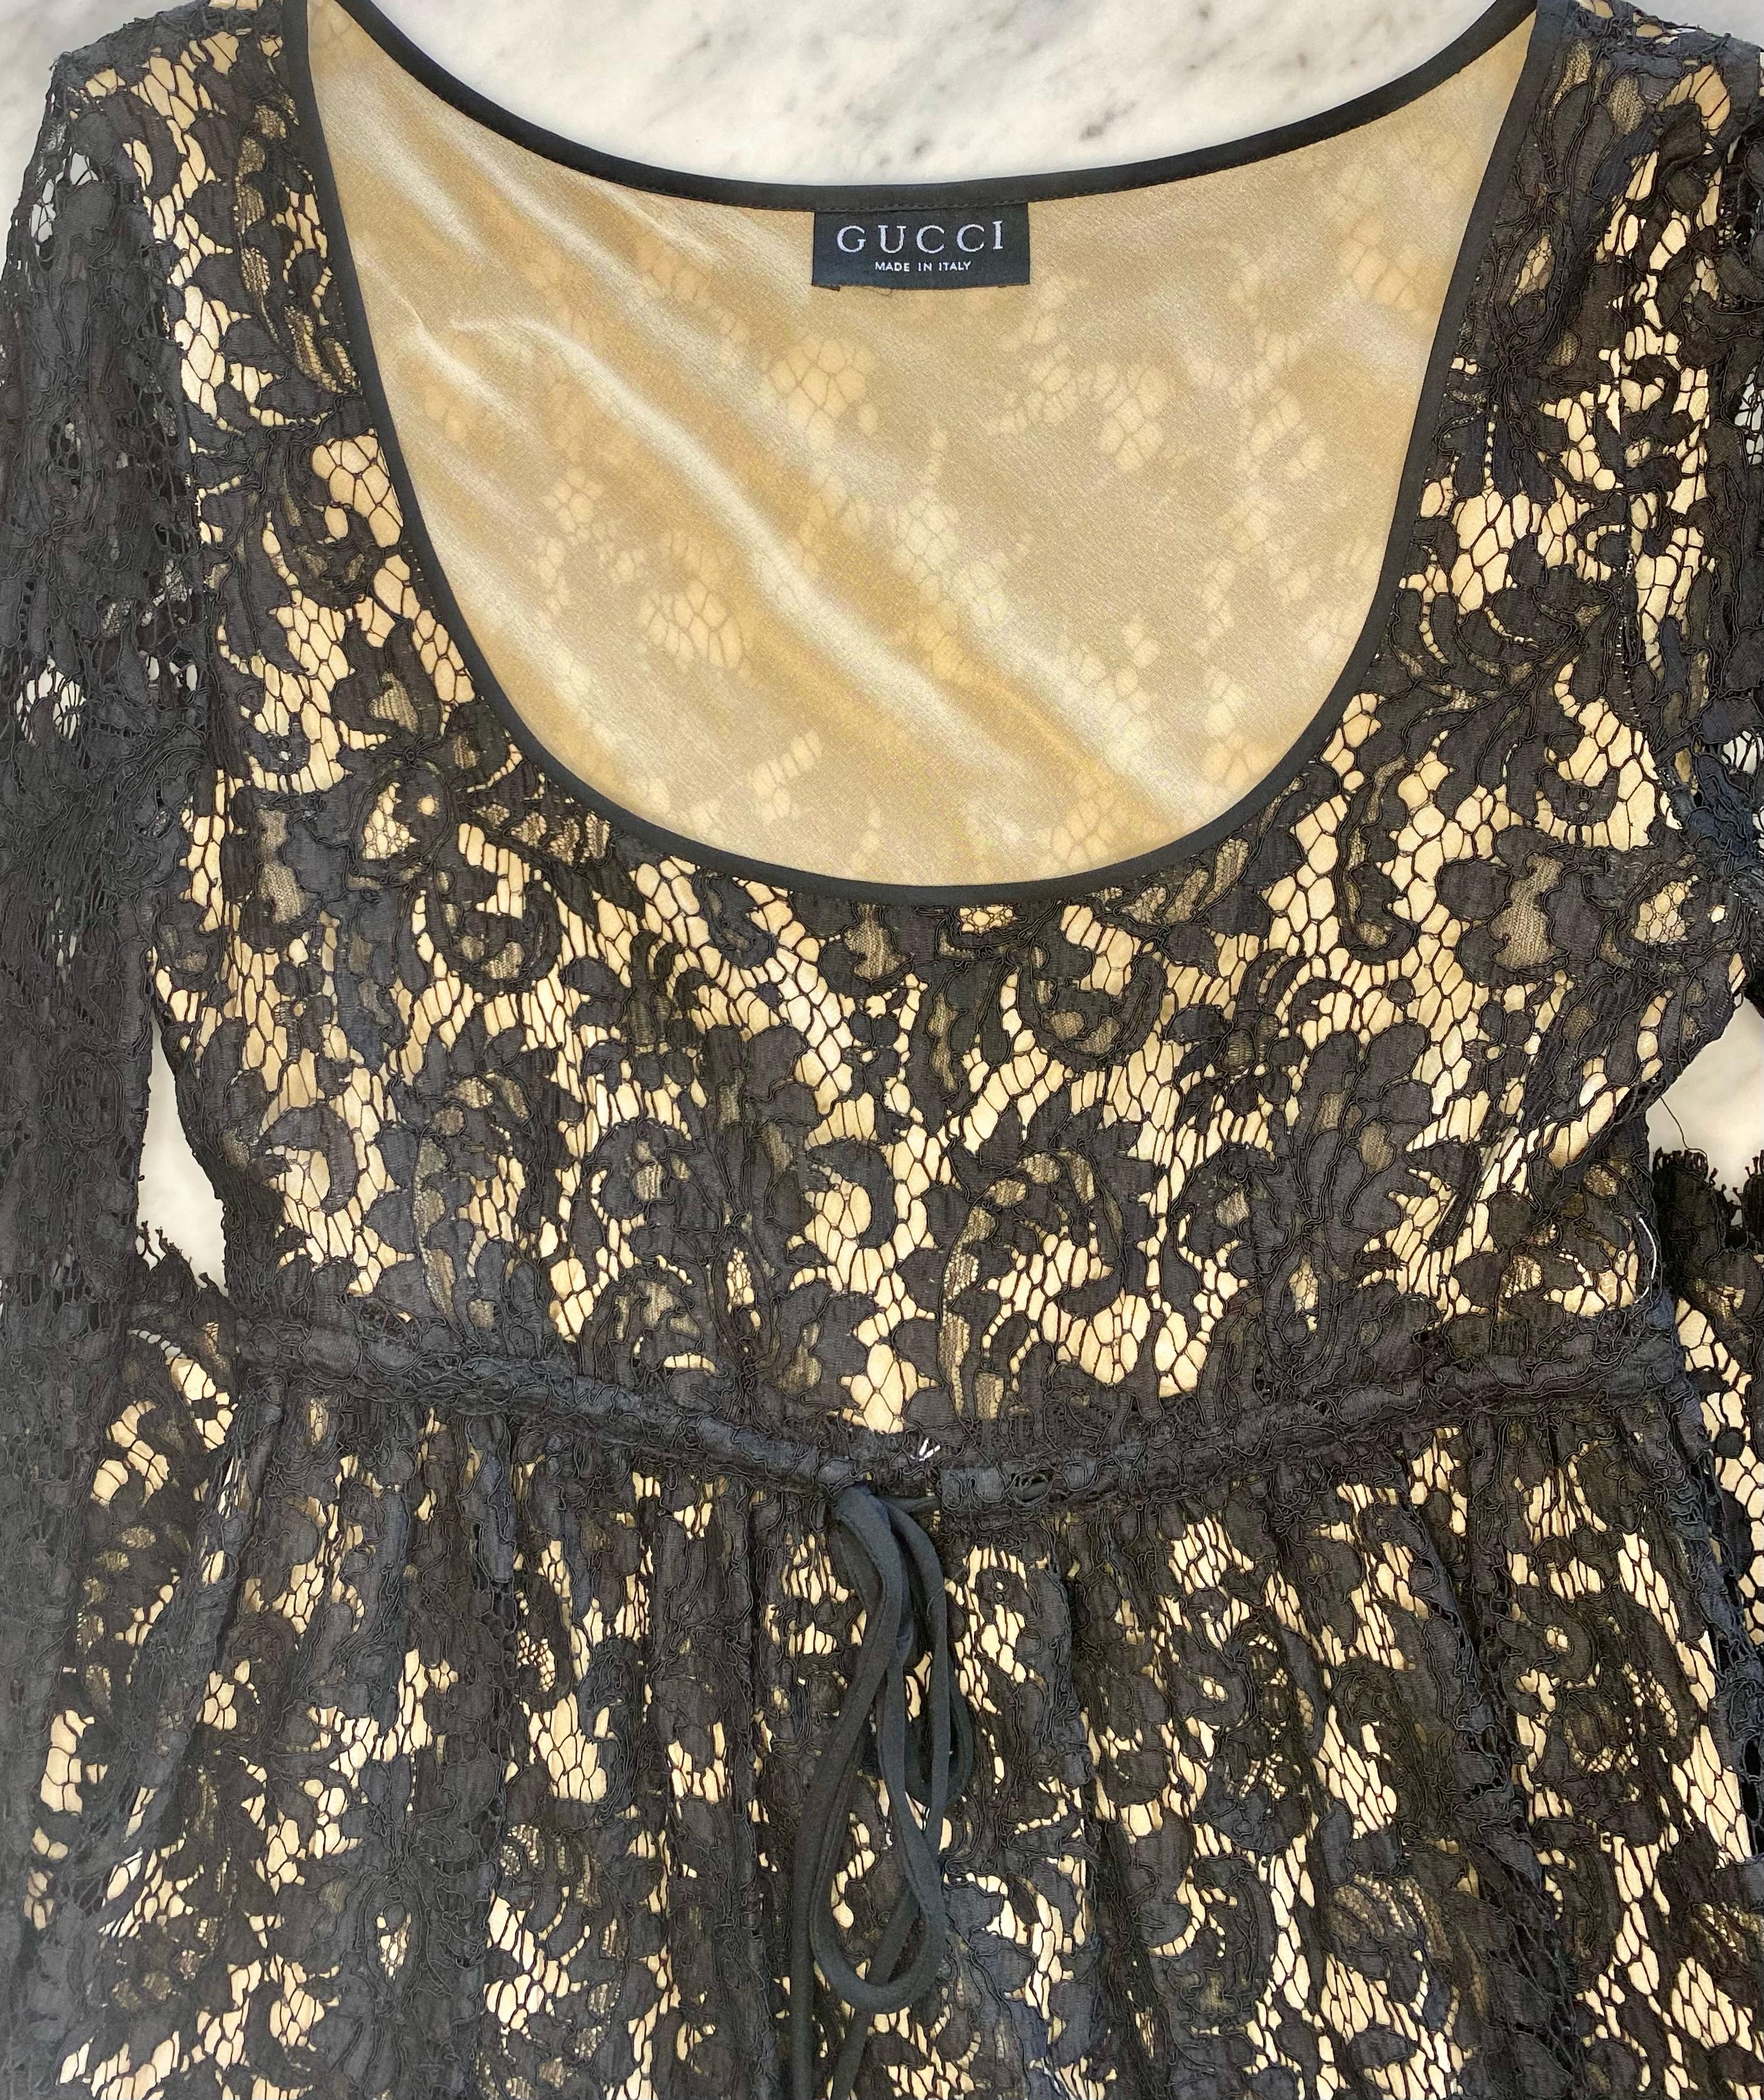 Black S/S 1996 Gucci by Tom Ford Sheer Lace Mini Babydoll Dress